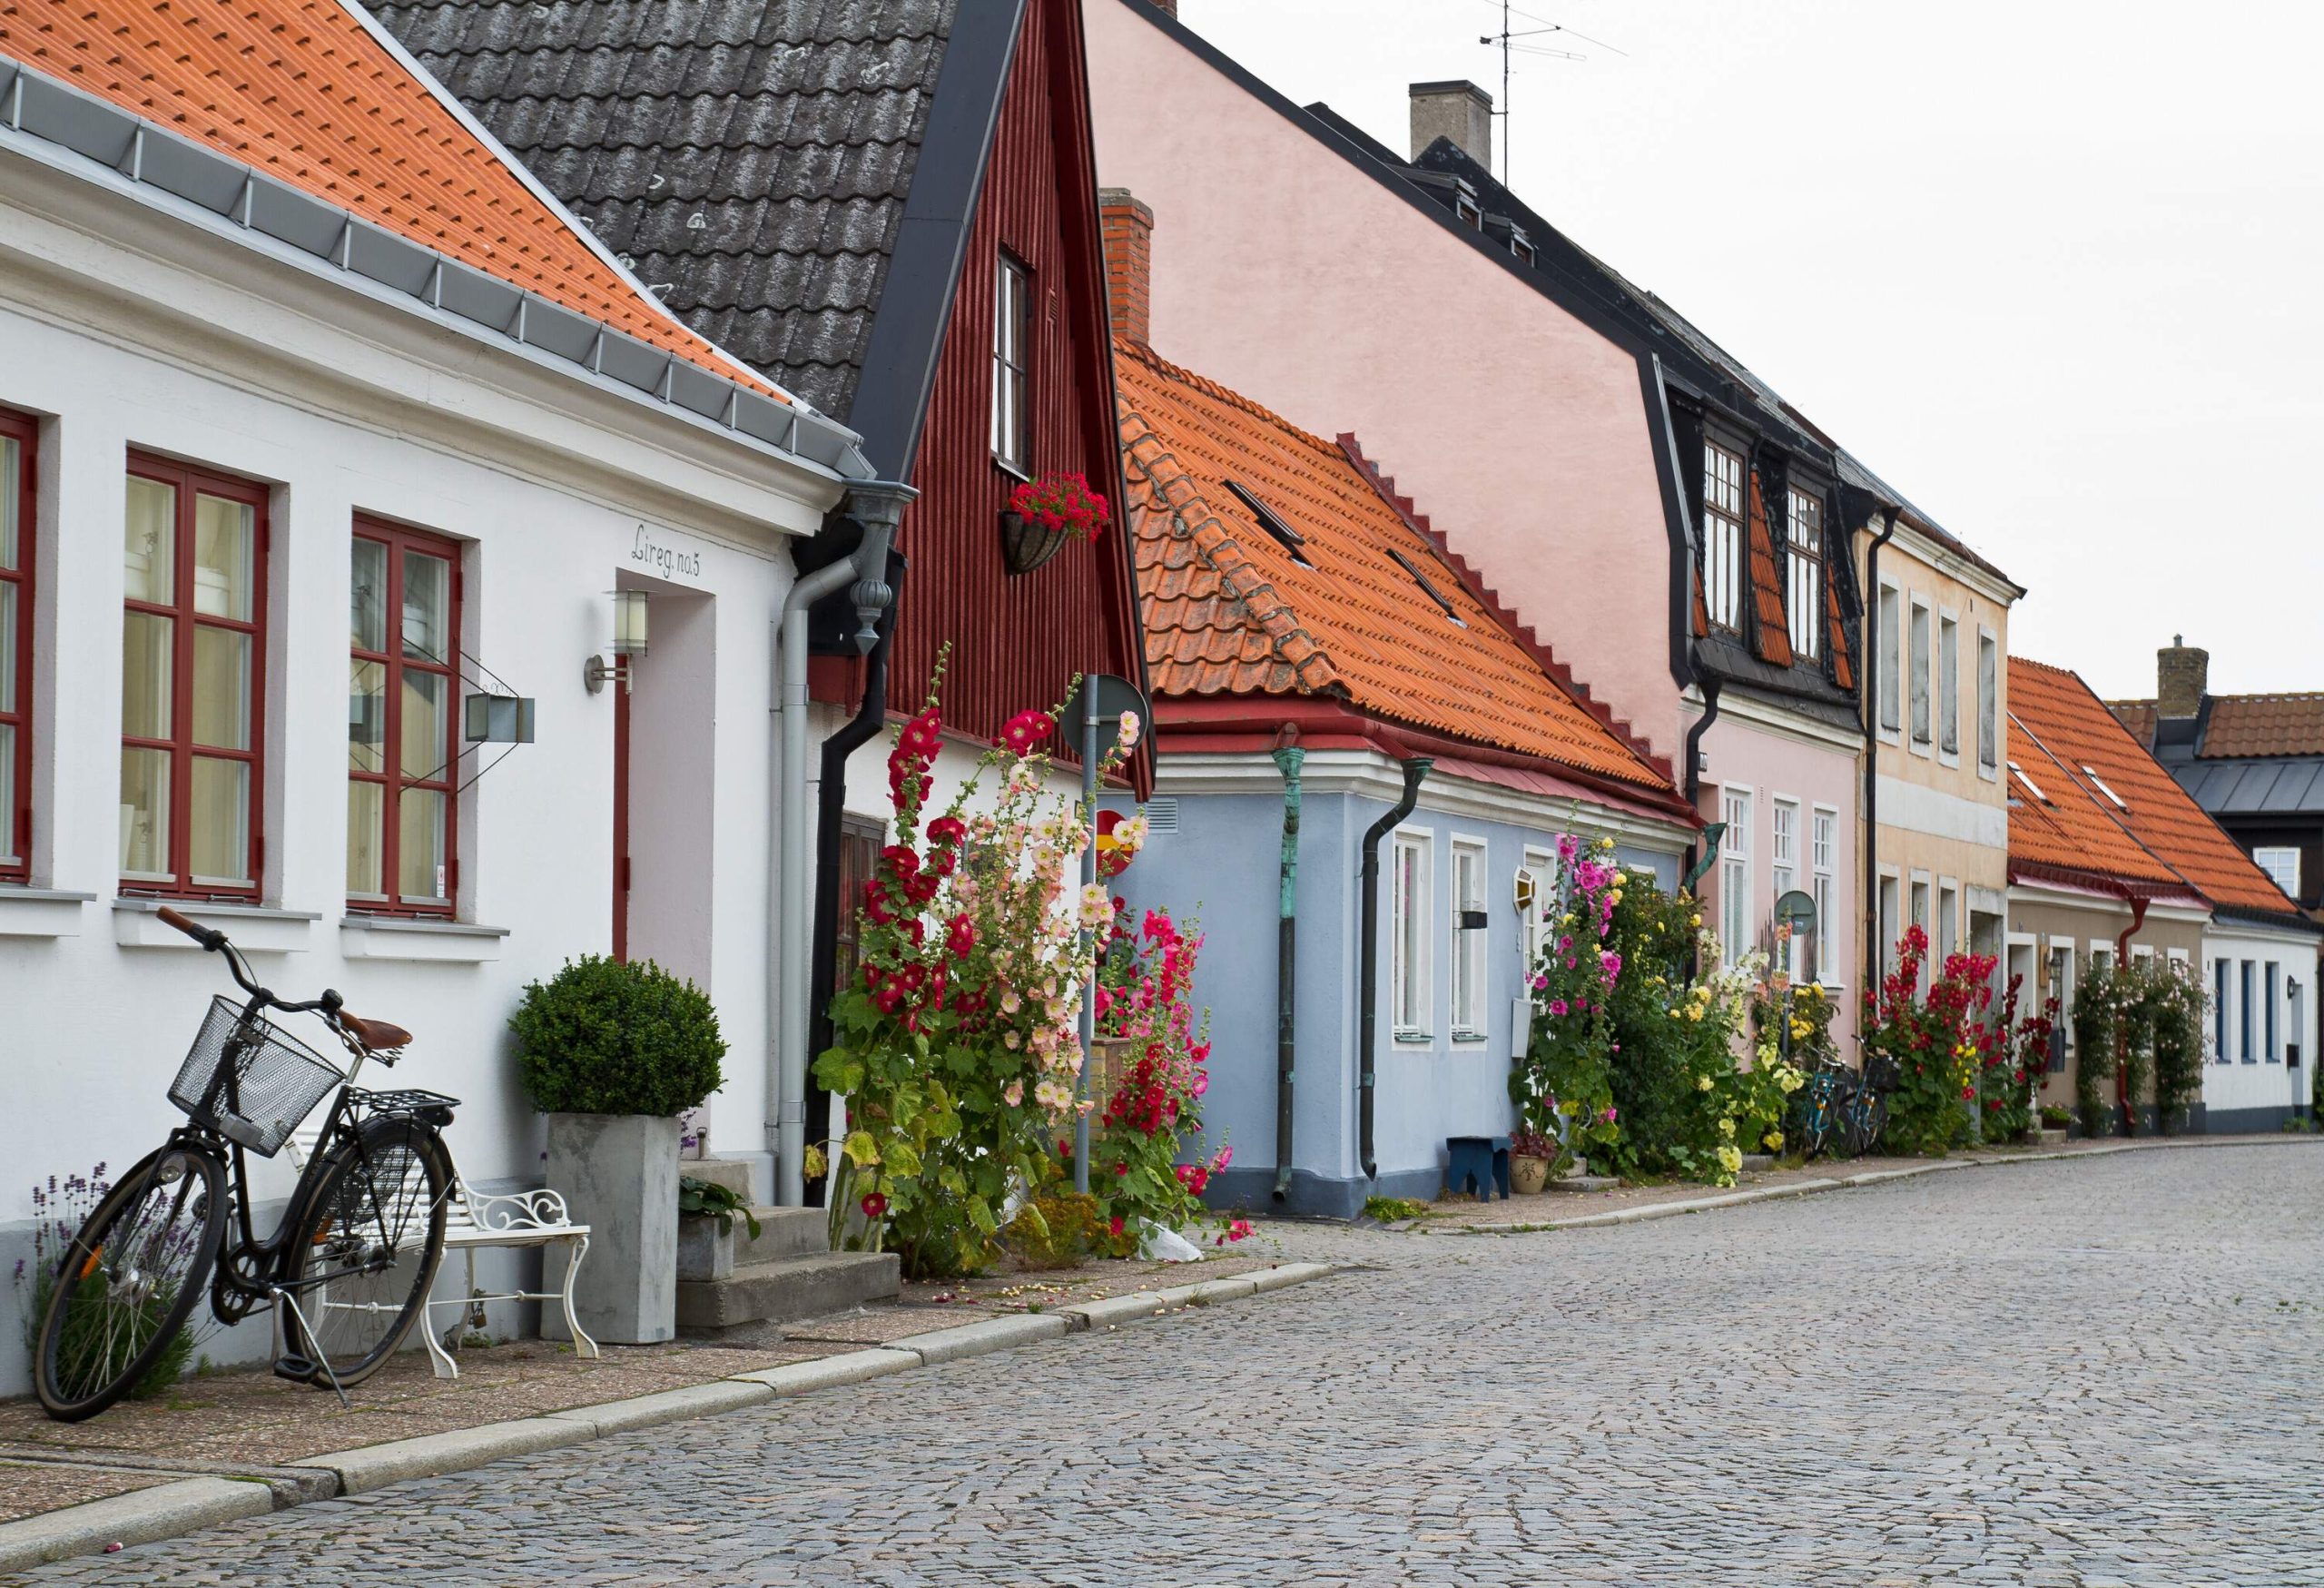 Colourful homes decked with flowers line a street with stone paving.